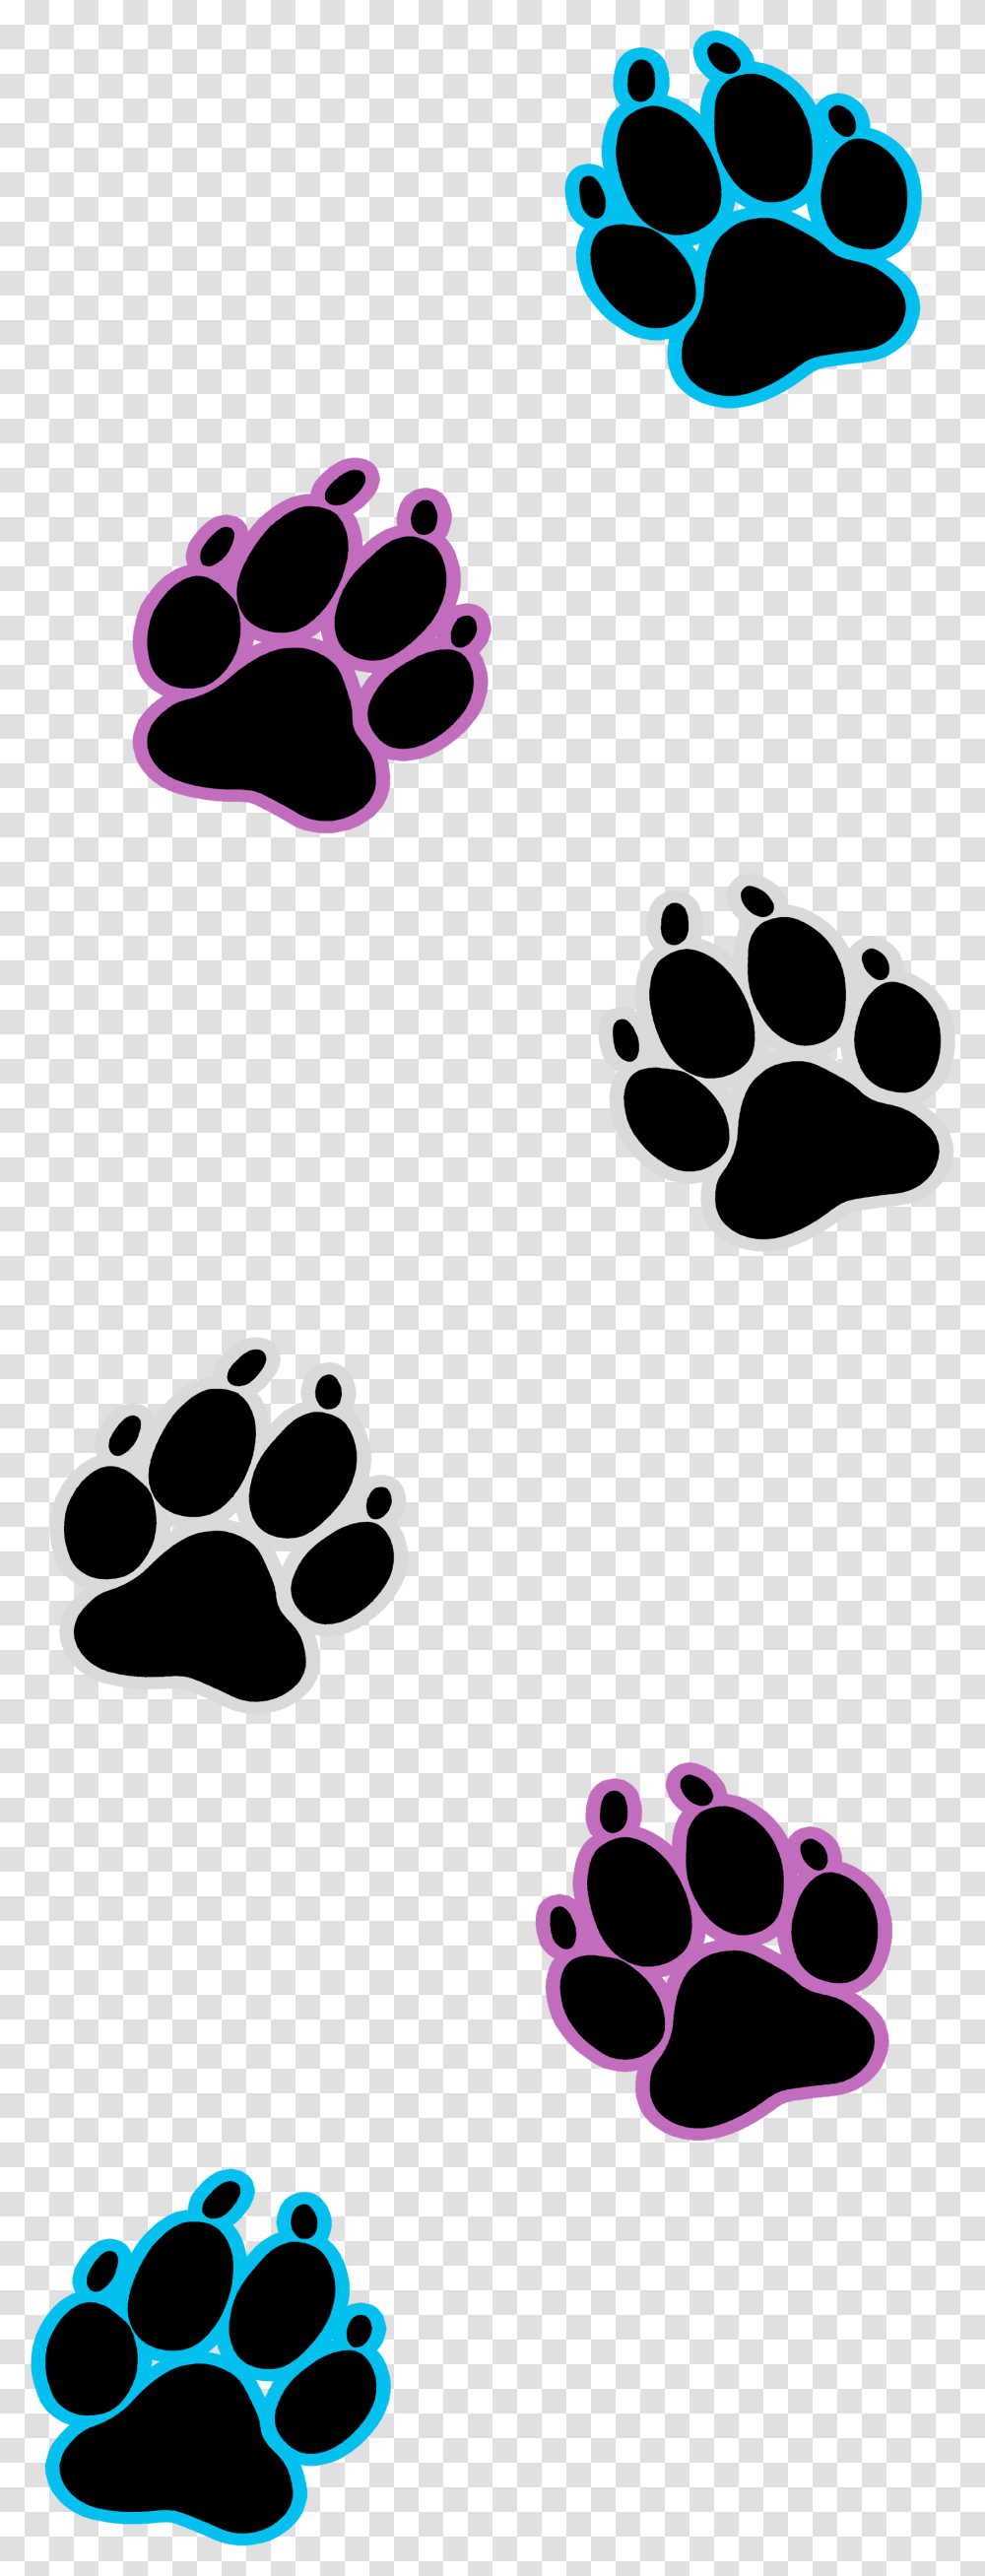 Dog Paw Prints Free Paw Background With Dog, Footprint Transparent Png – Pngset.com